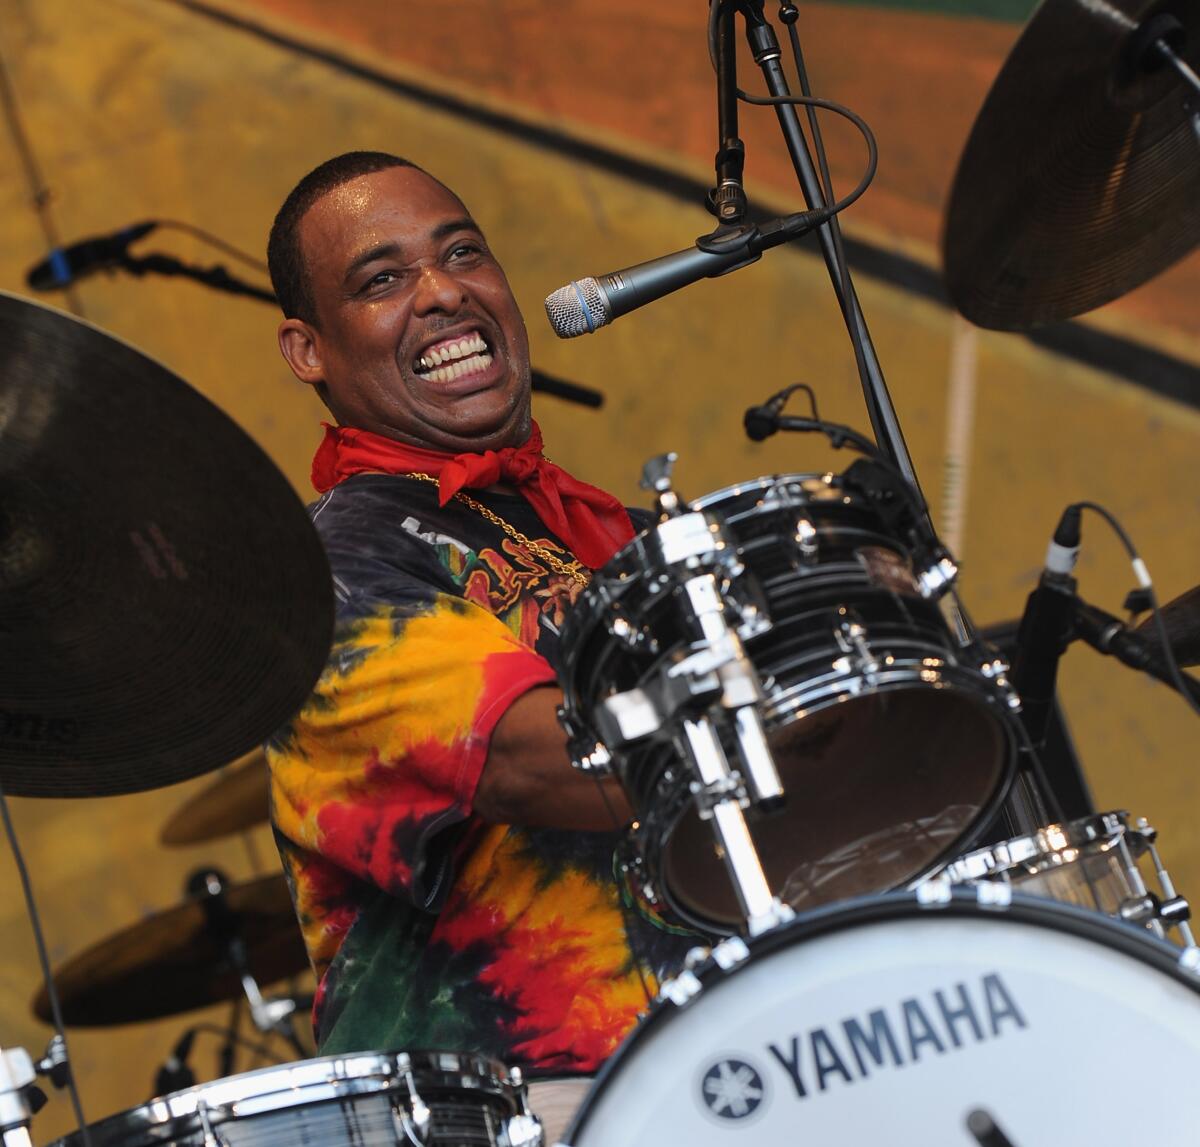 A smiling man performs behind a drum set at a festival.